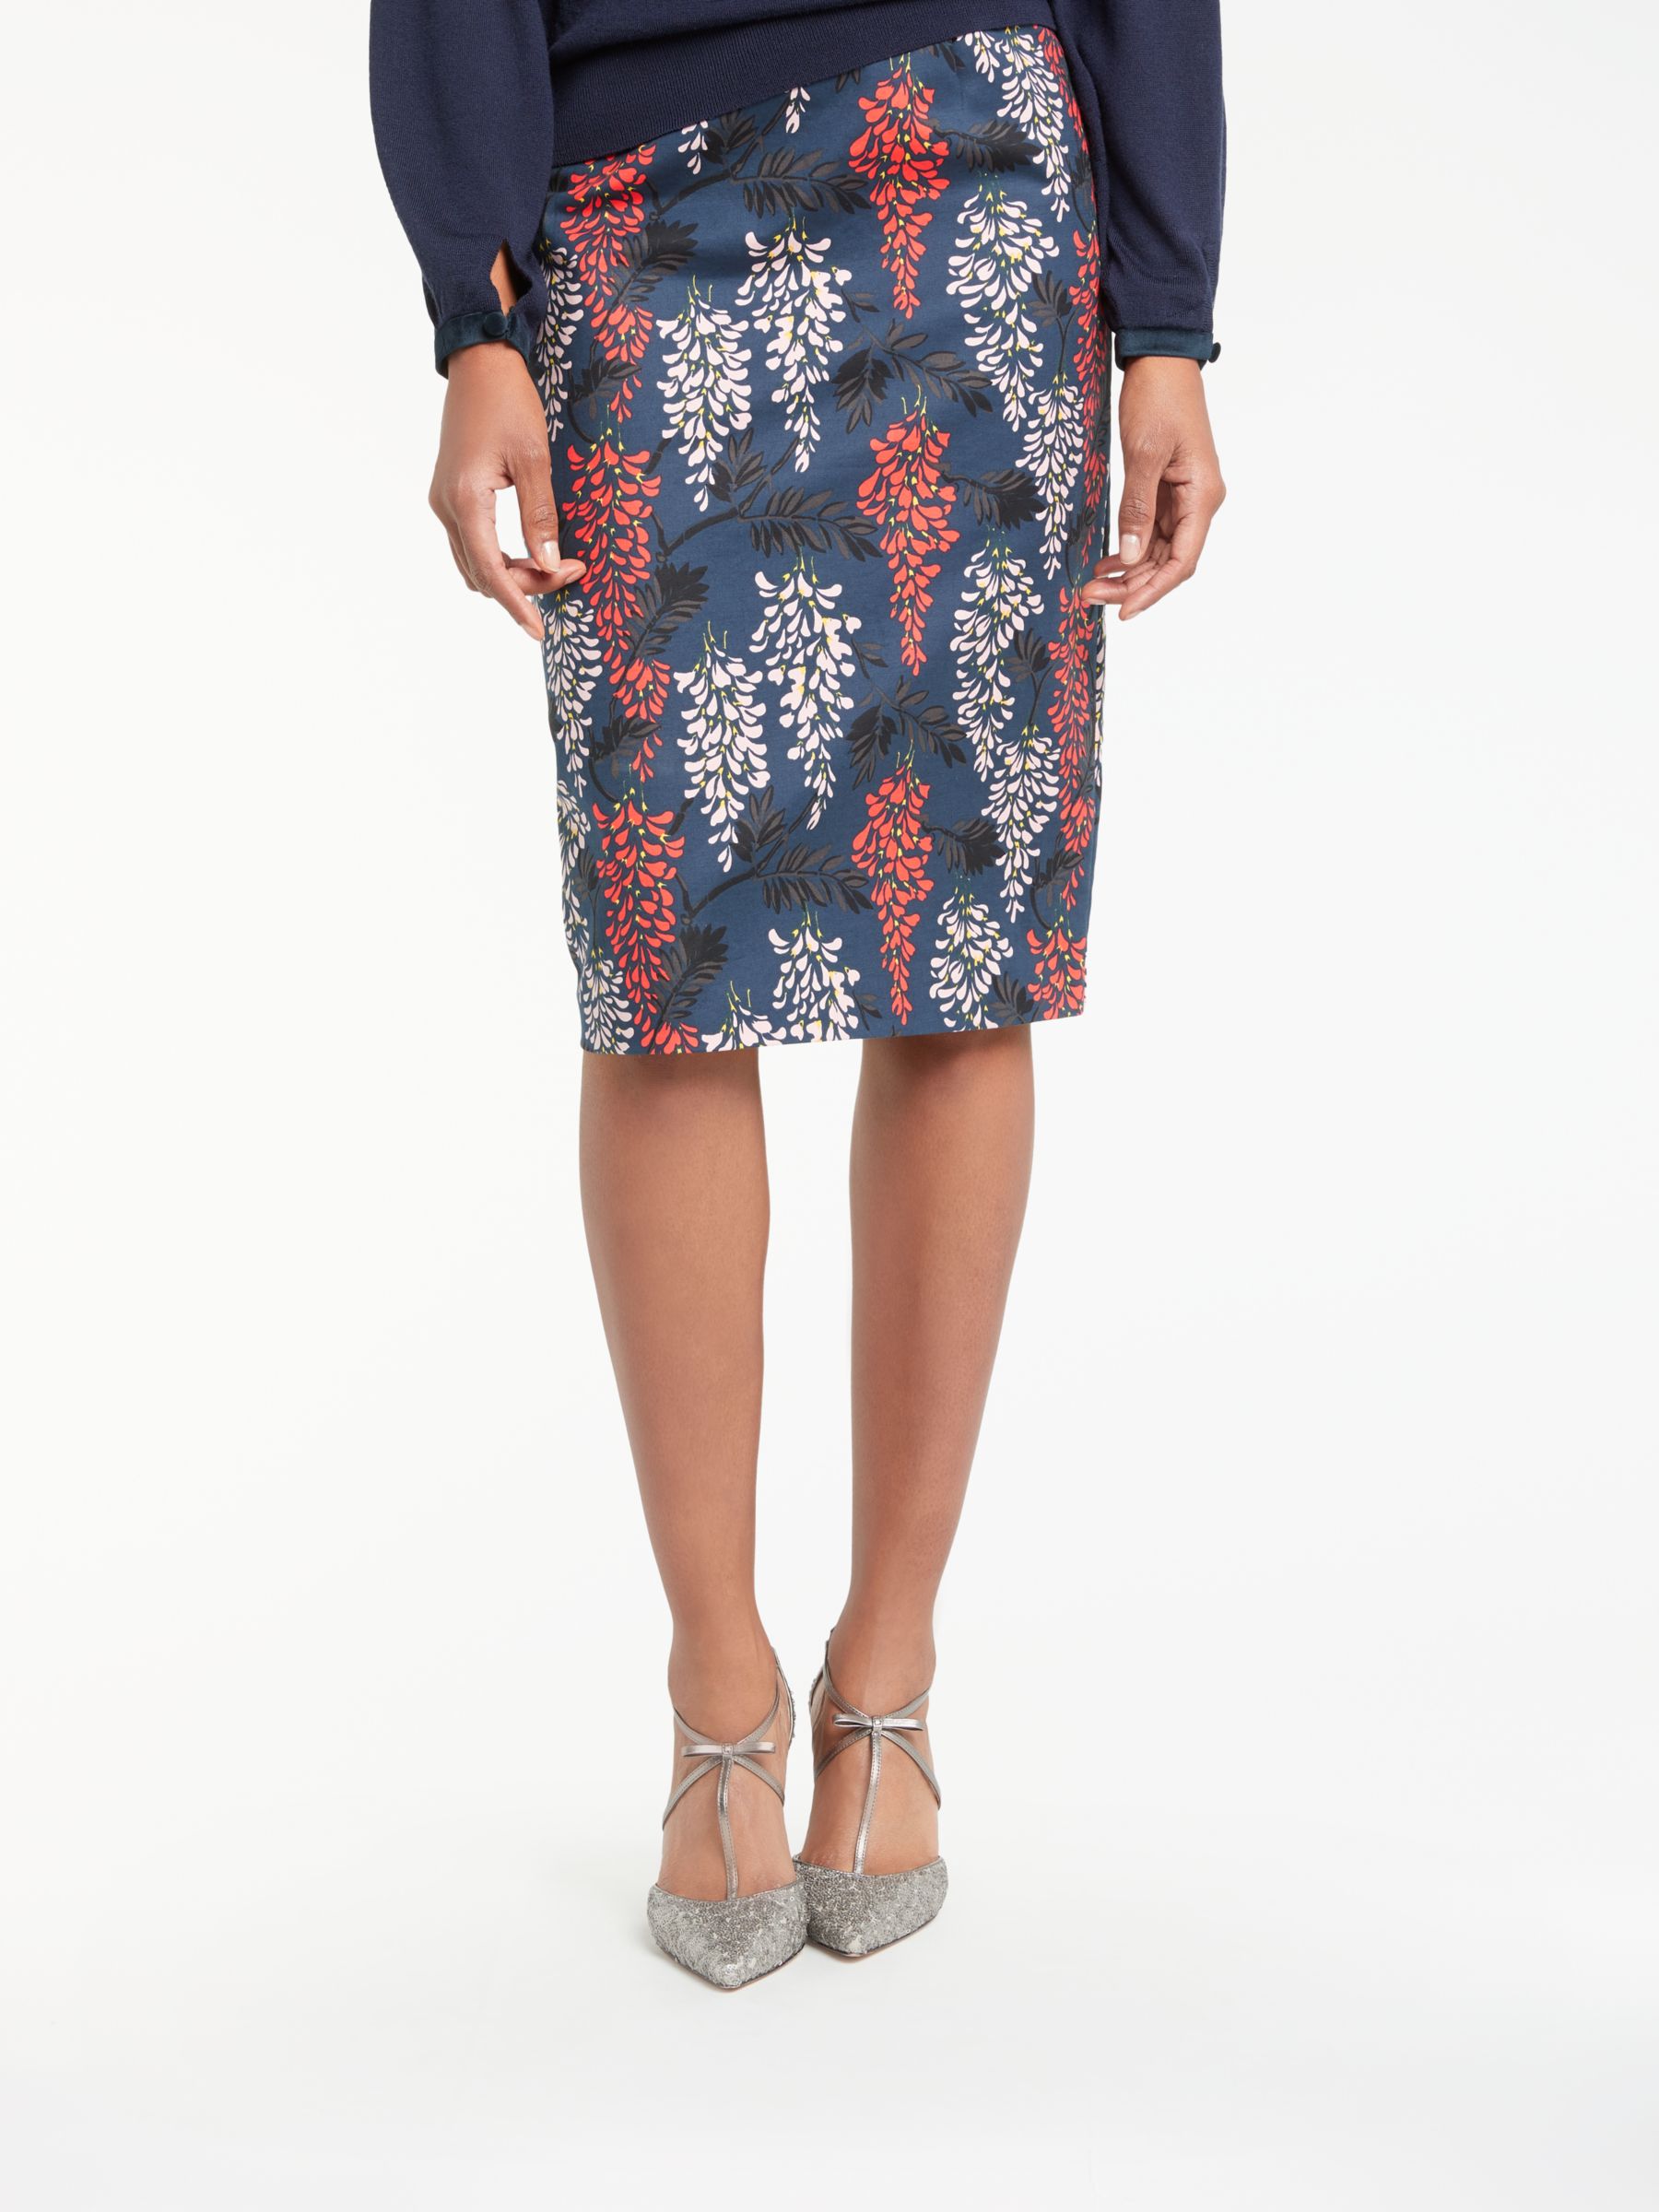 Boden Floral Print Richmond Party Pencil Skirt, Ink Pot/Wisteria at ...